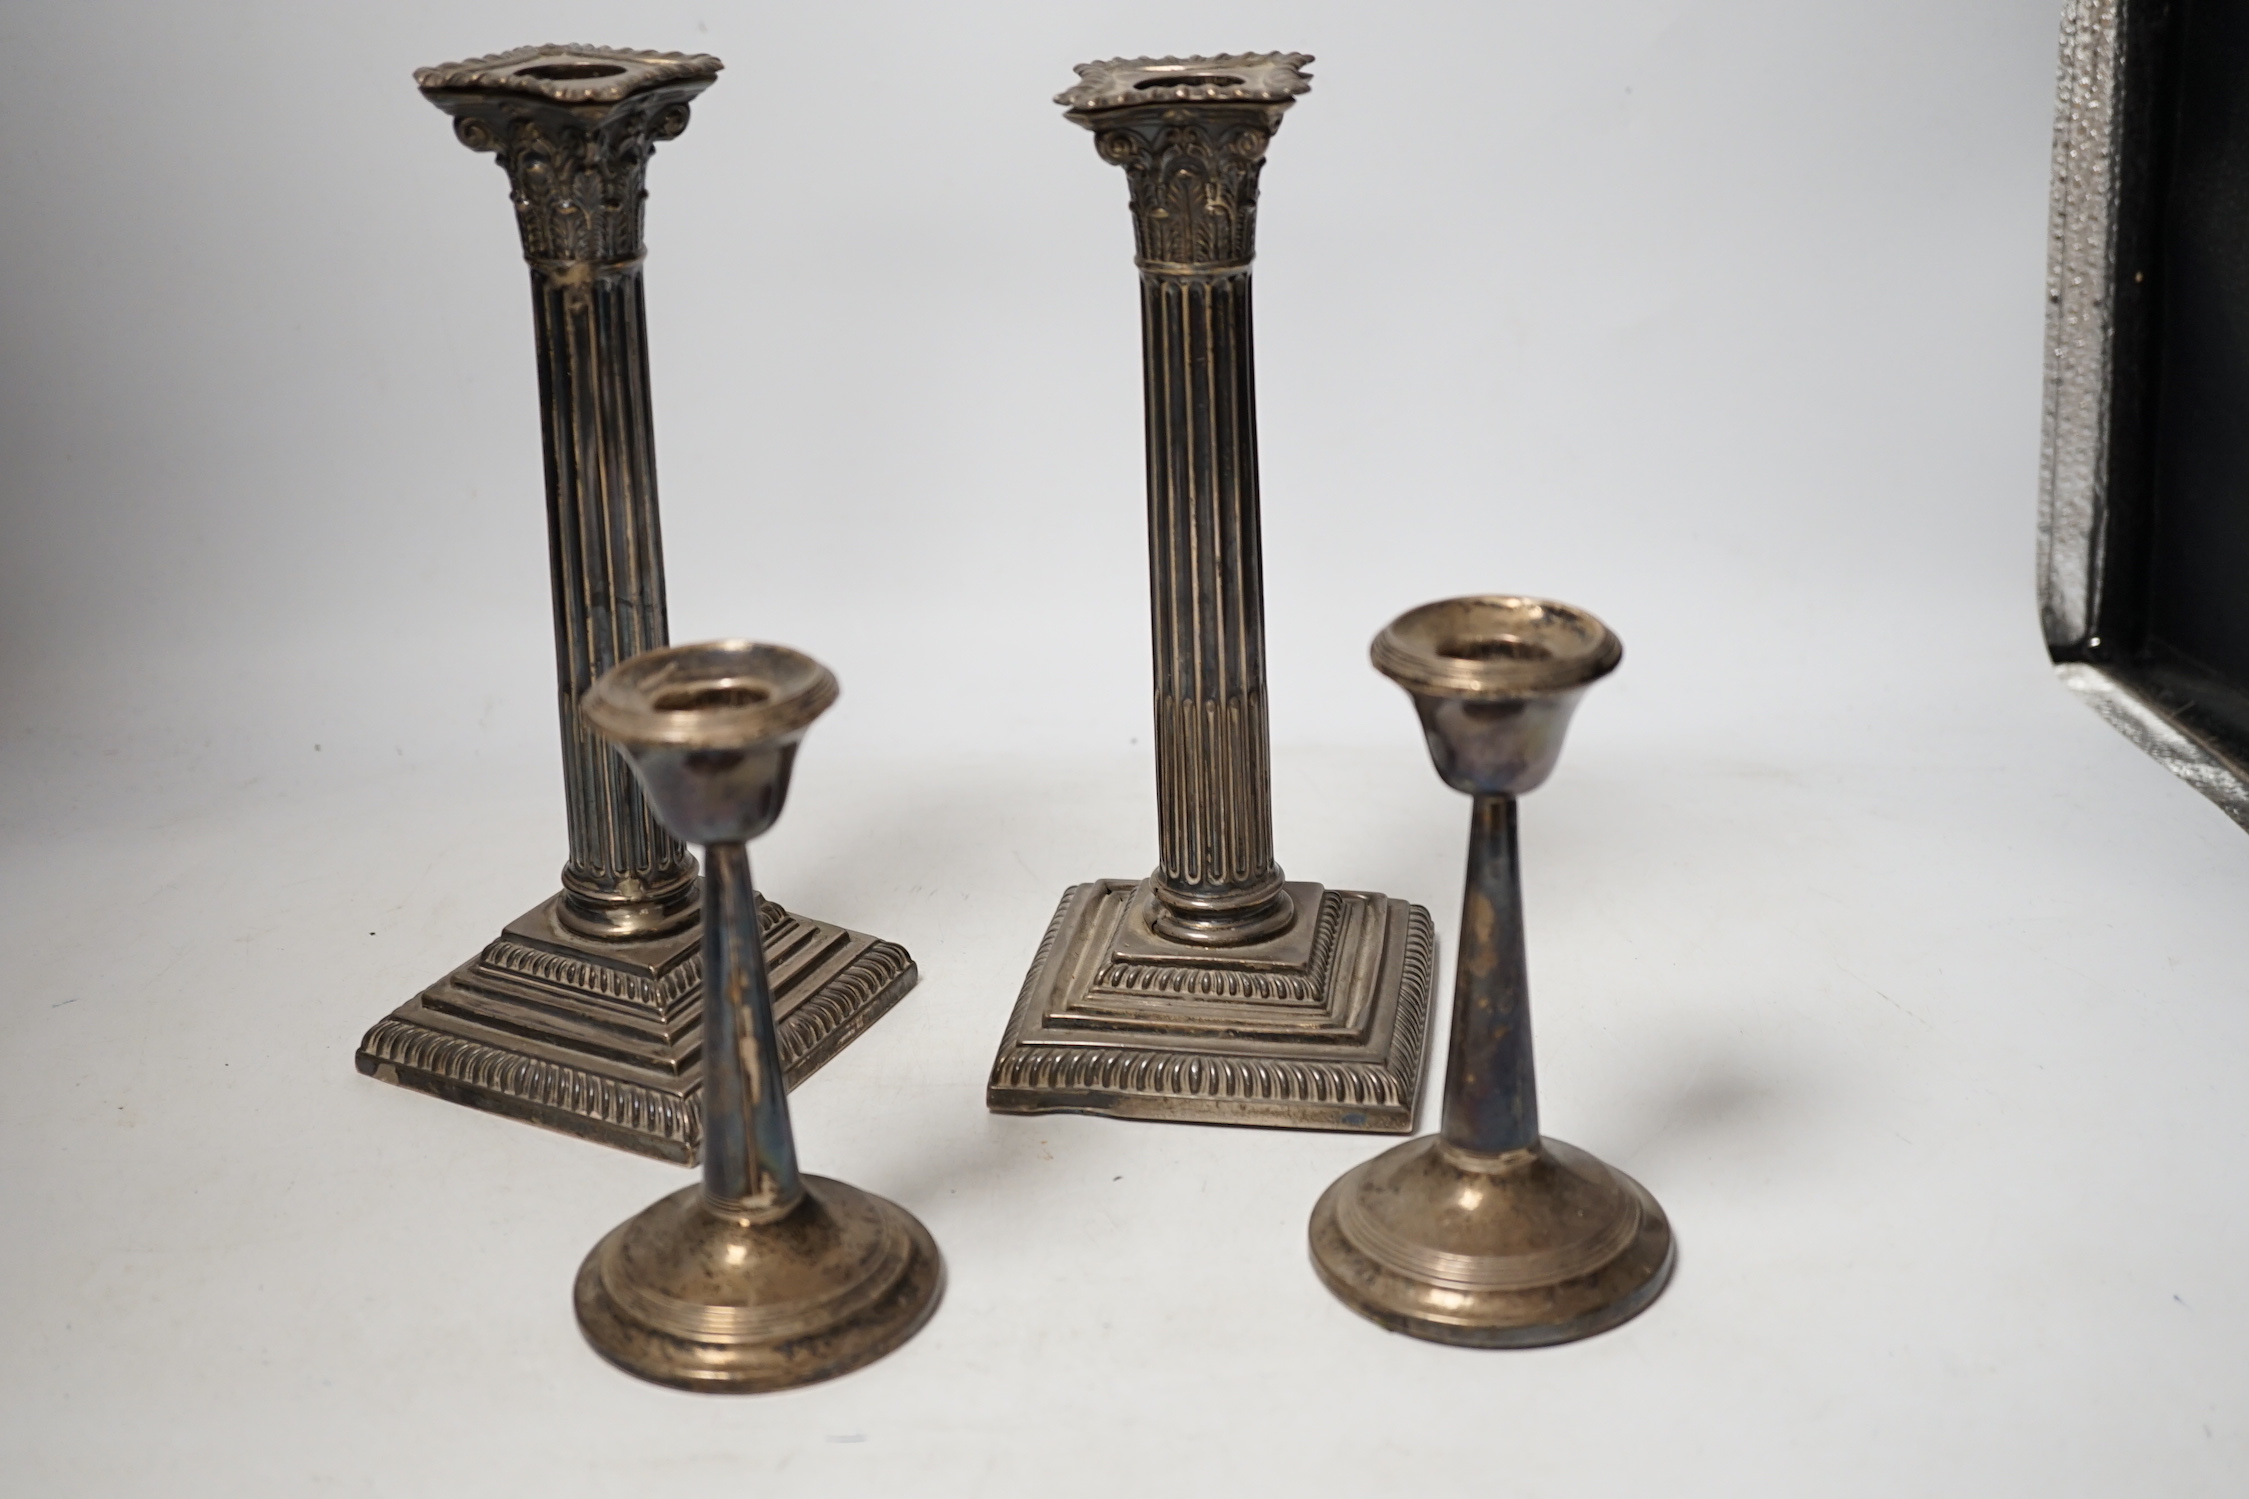 A pair of late Victorian silver Corinthian column candlesticks, Hawksworth, Eyre & Co, Sheffield 1896, 22.5cm, weighted (a.f.), and a smaller pair of silver mounted candlesticks.